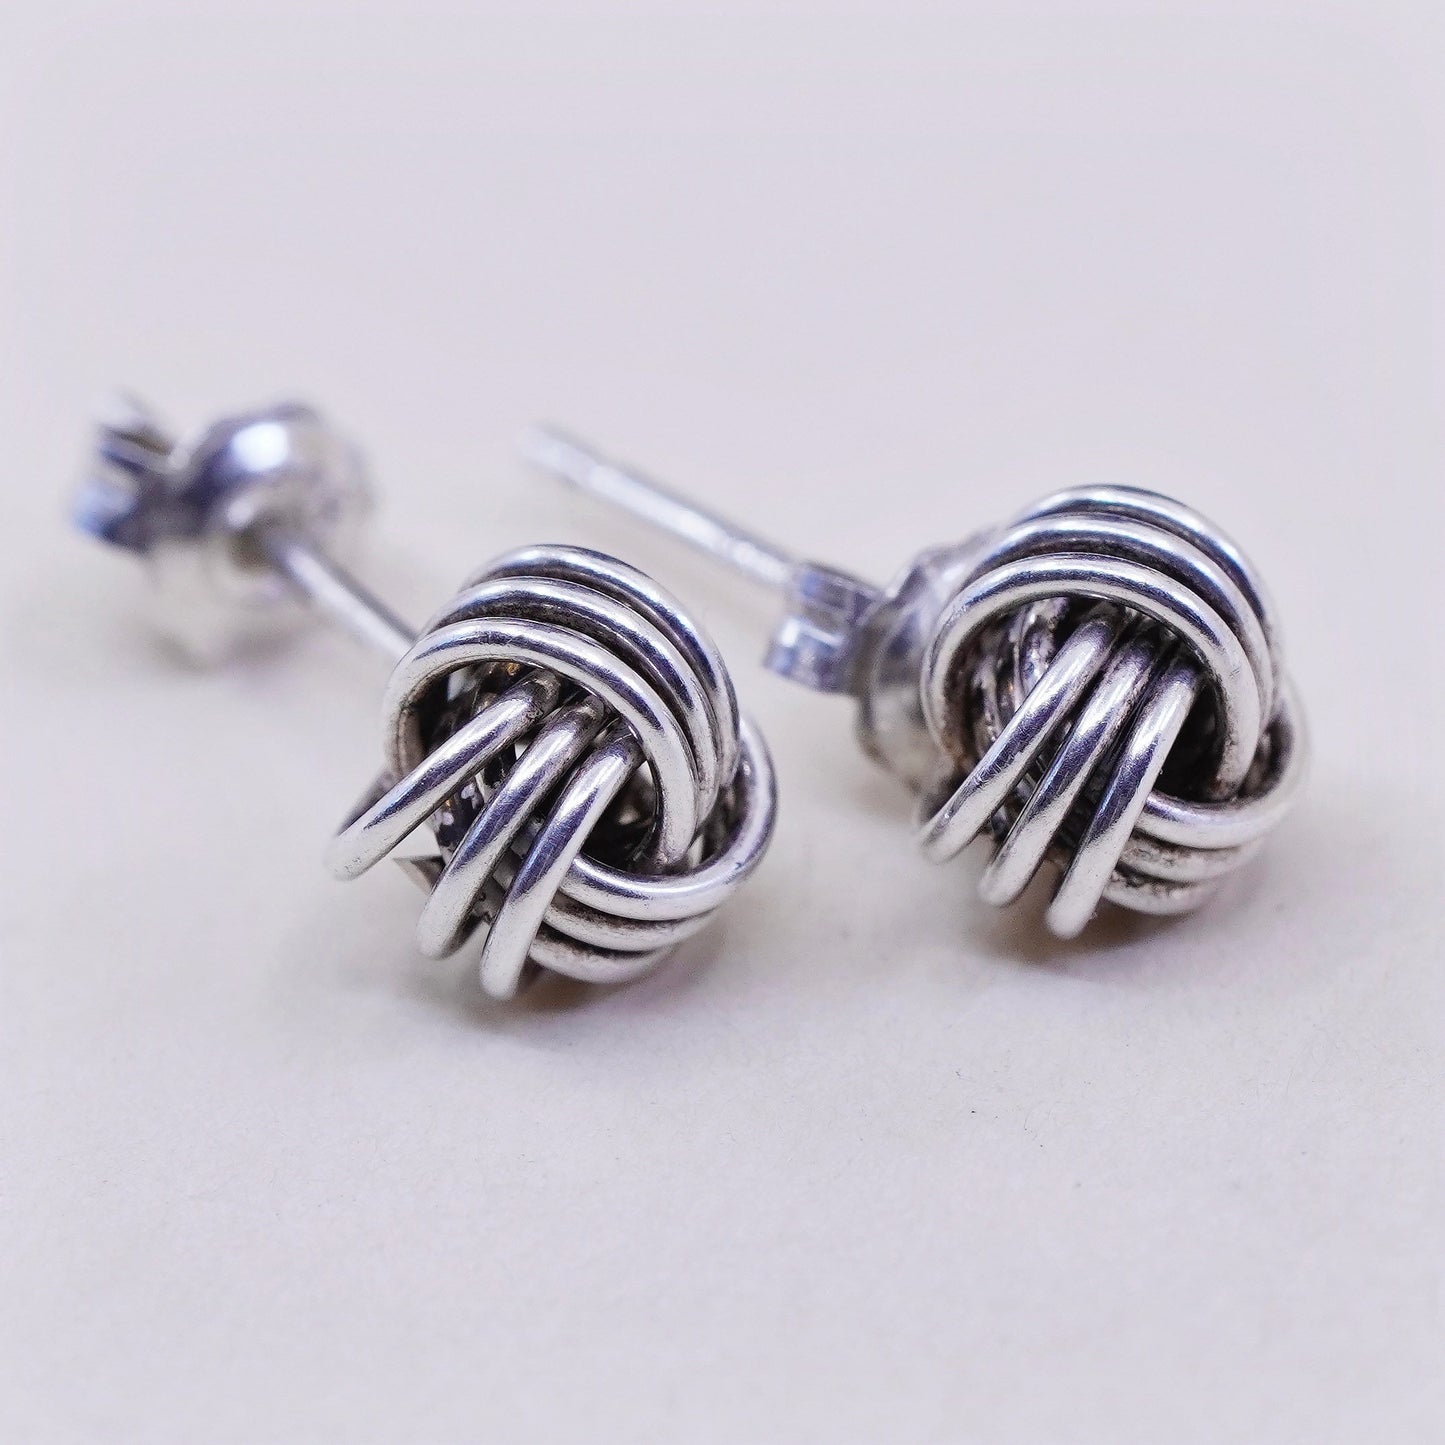 0.25”, Vintage Sterling 925 silver handmade earrings, Entwined cable studs